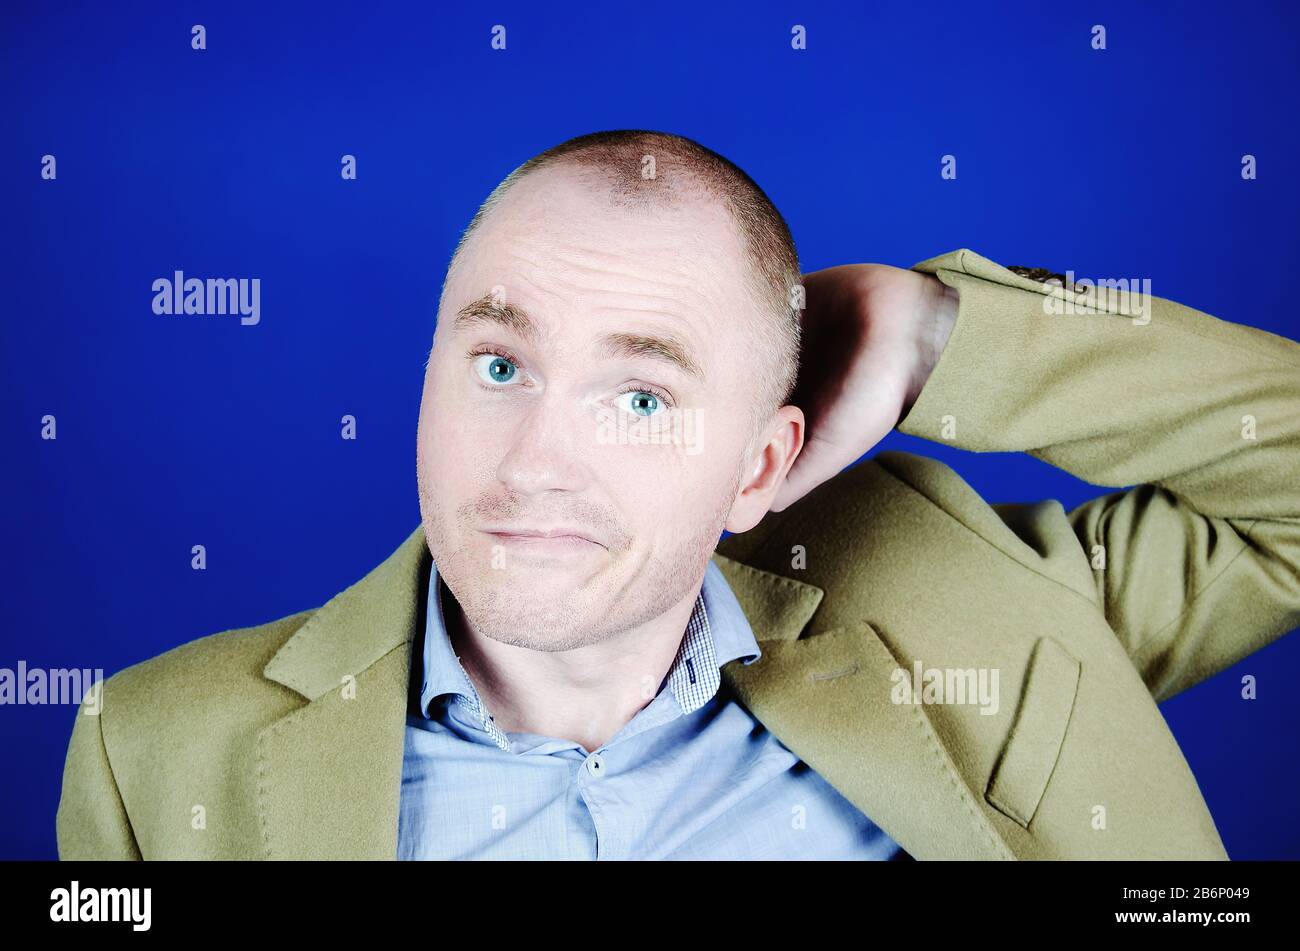 Portrait of confused or surprised white bald man scratch his head. Emotions concept Stock Photo